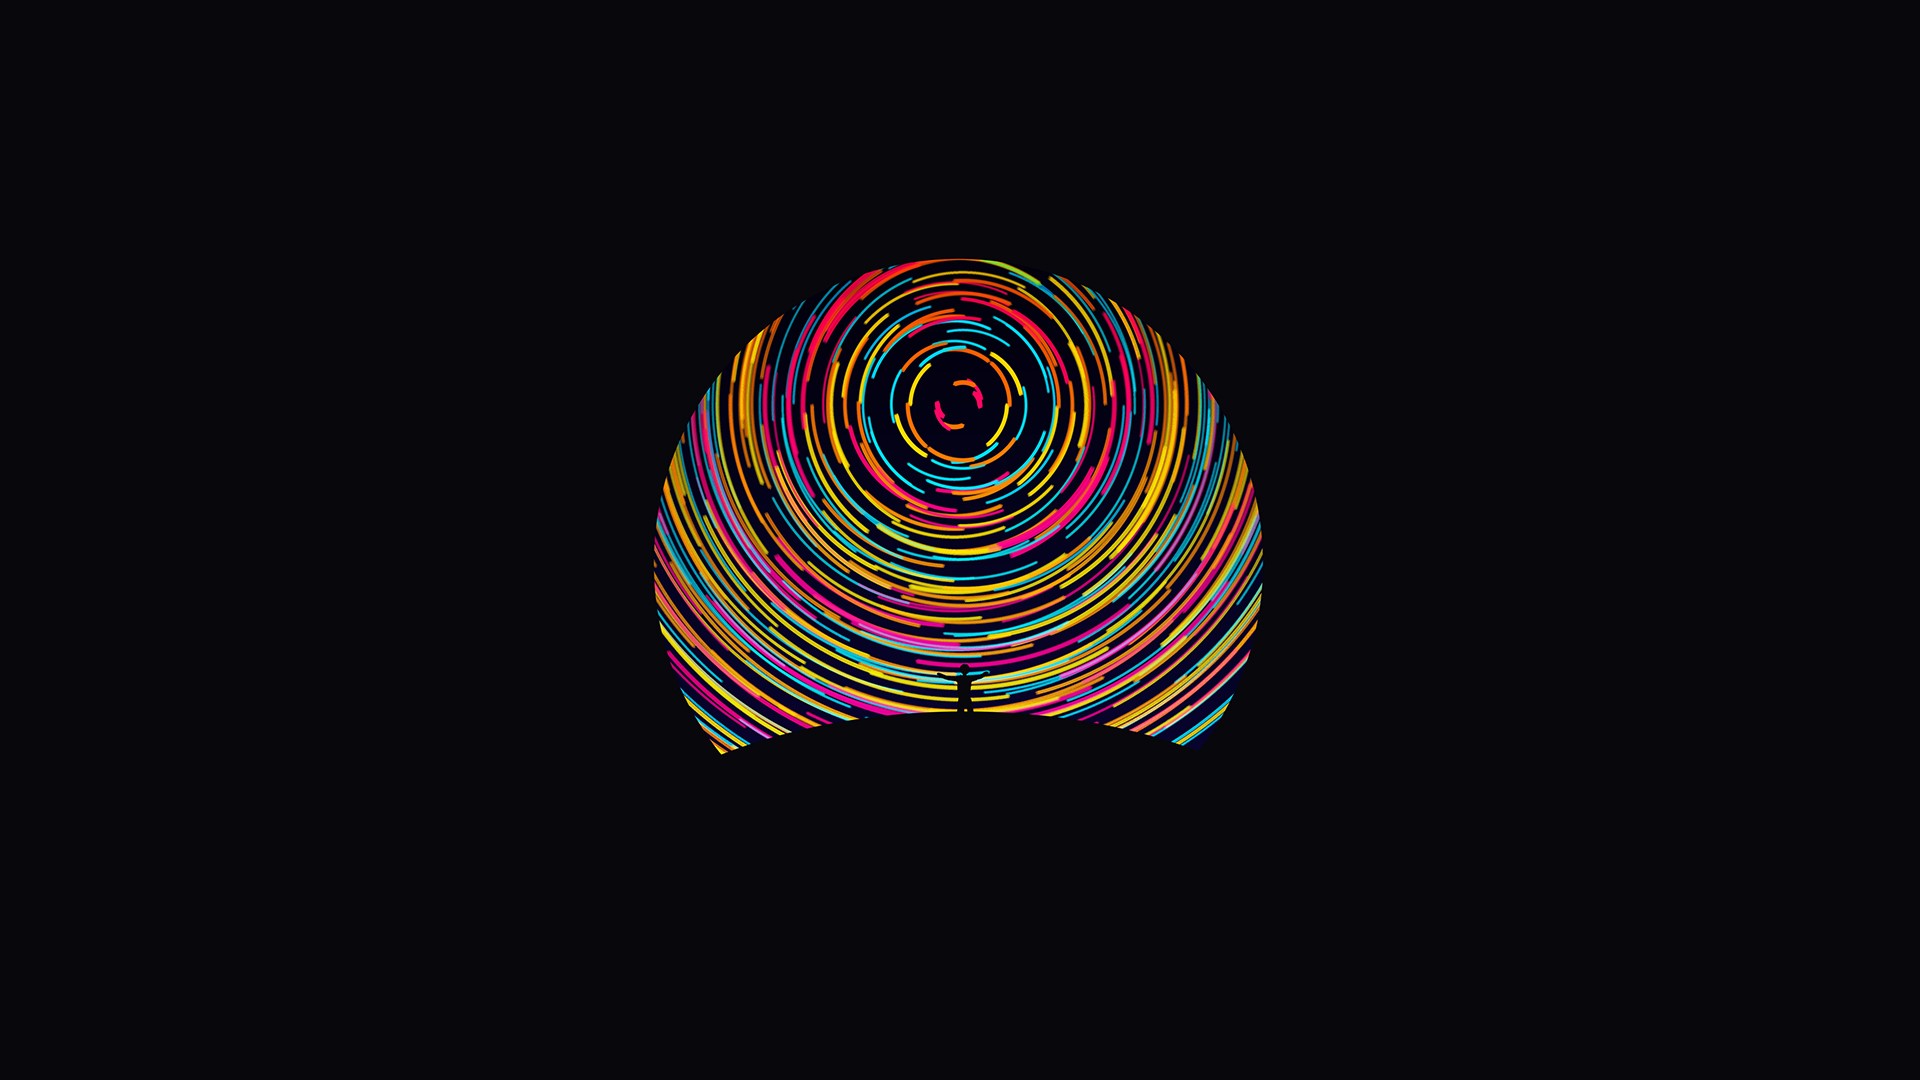 men, Digital art, Minimalism, Black background, Abstract, Circle, Colorful, Silhouette, Star trails Wallpaper